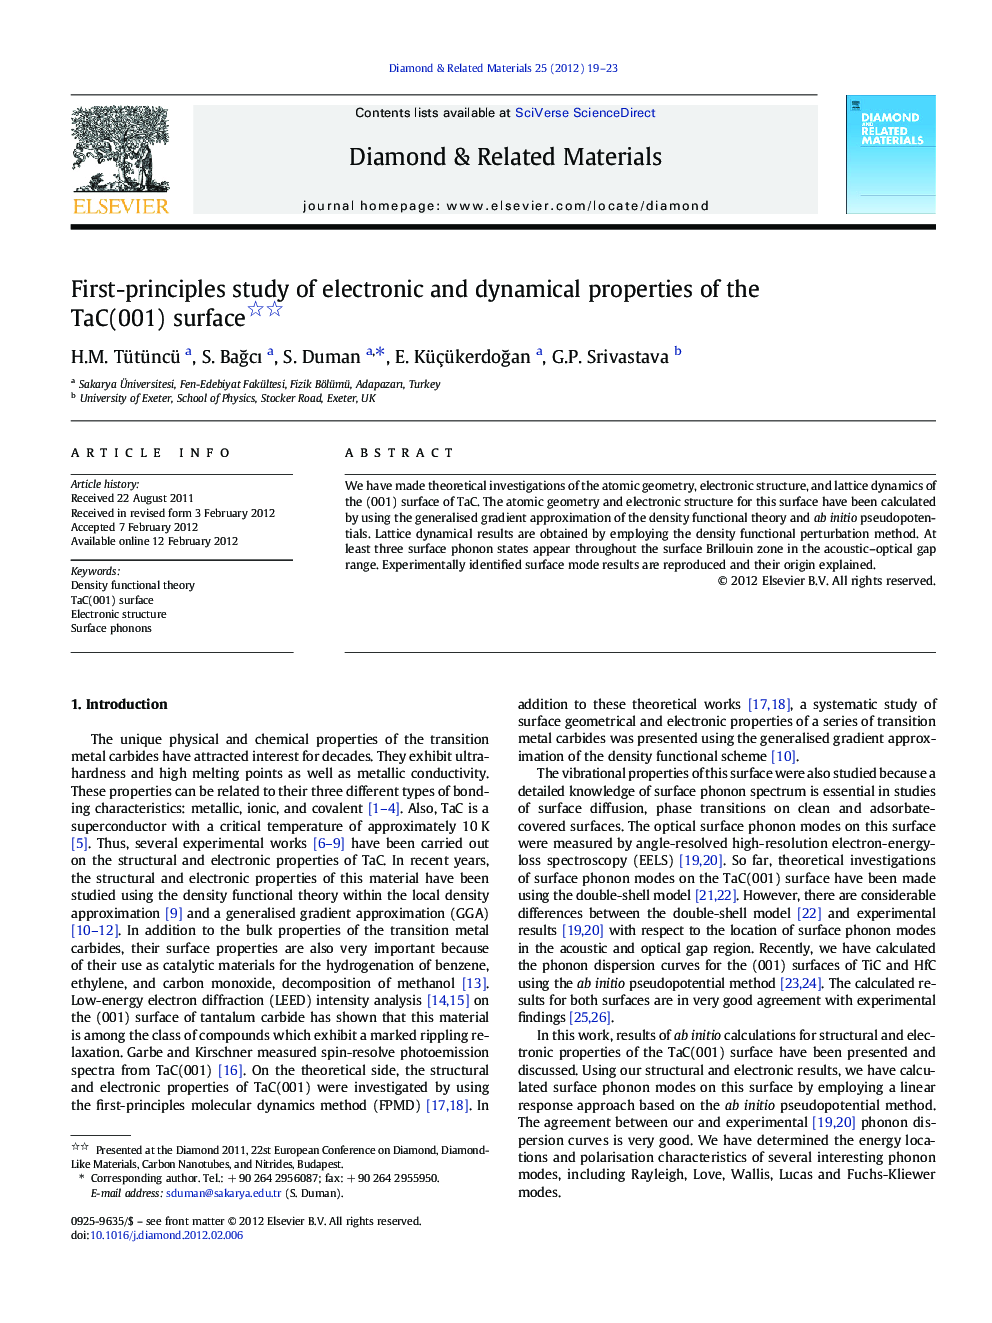 First-principles study of electronic and dynamical properties of the TaC(001) surface 